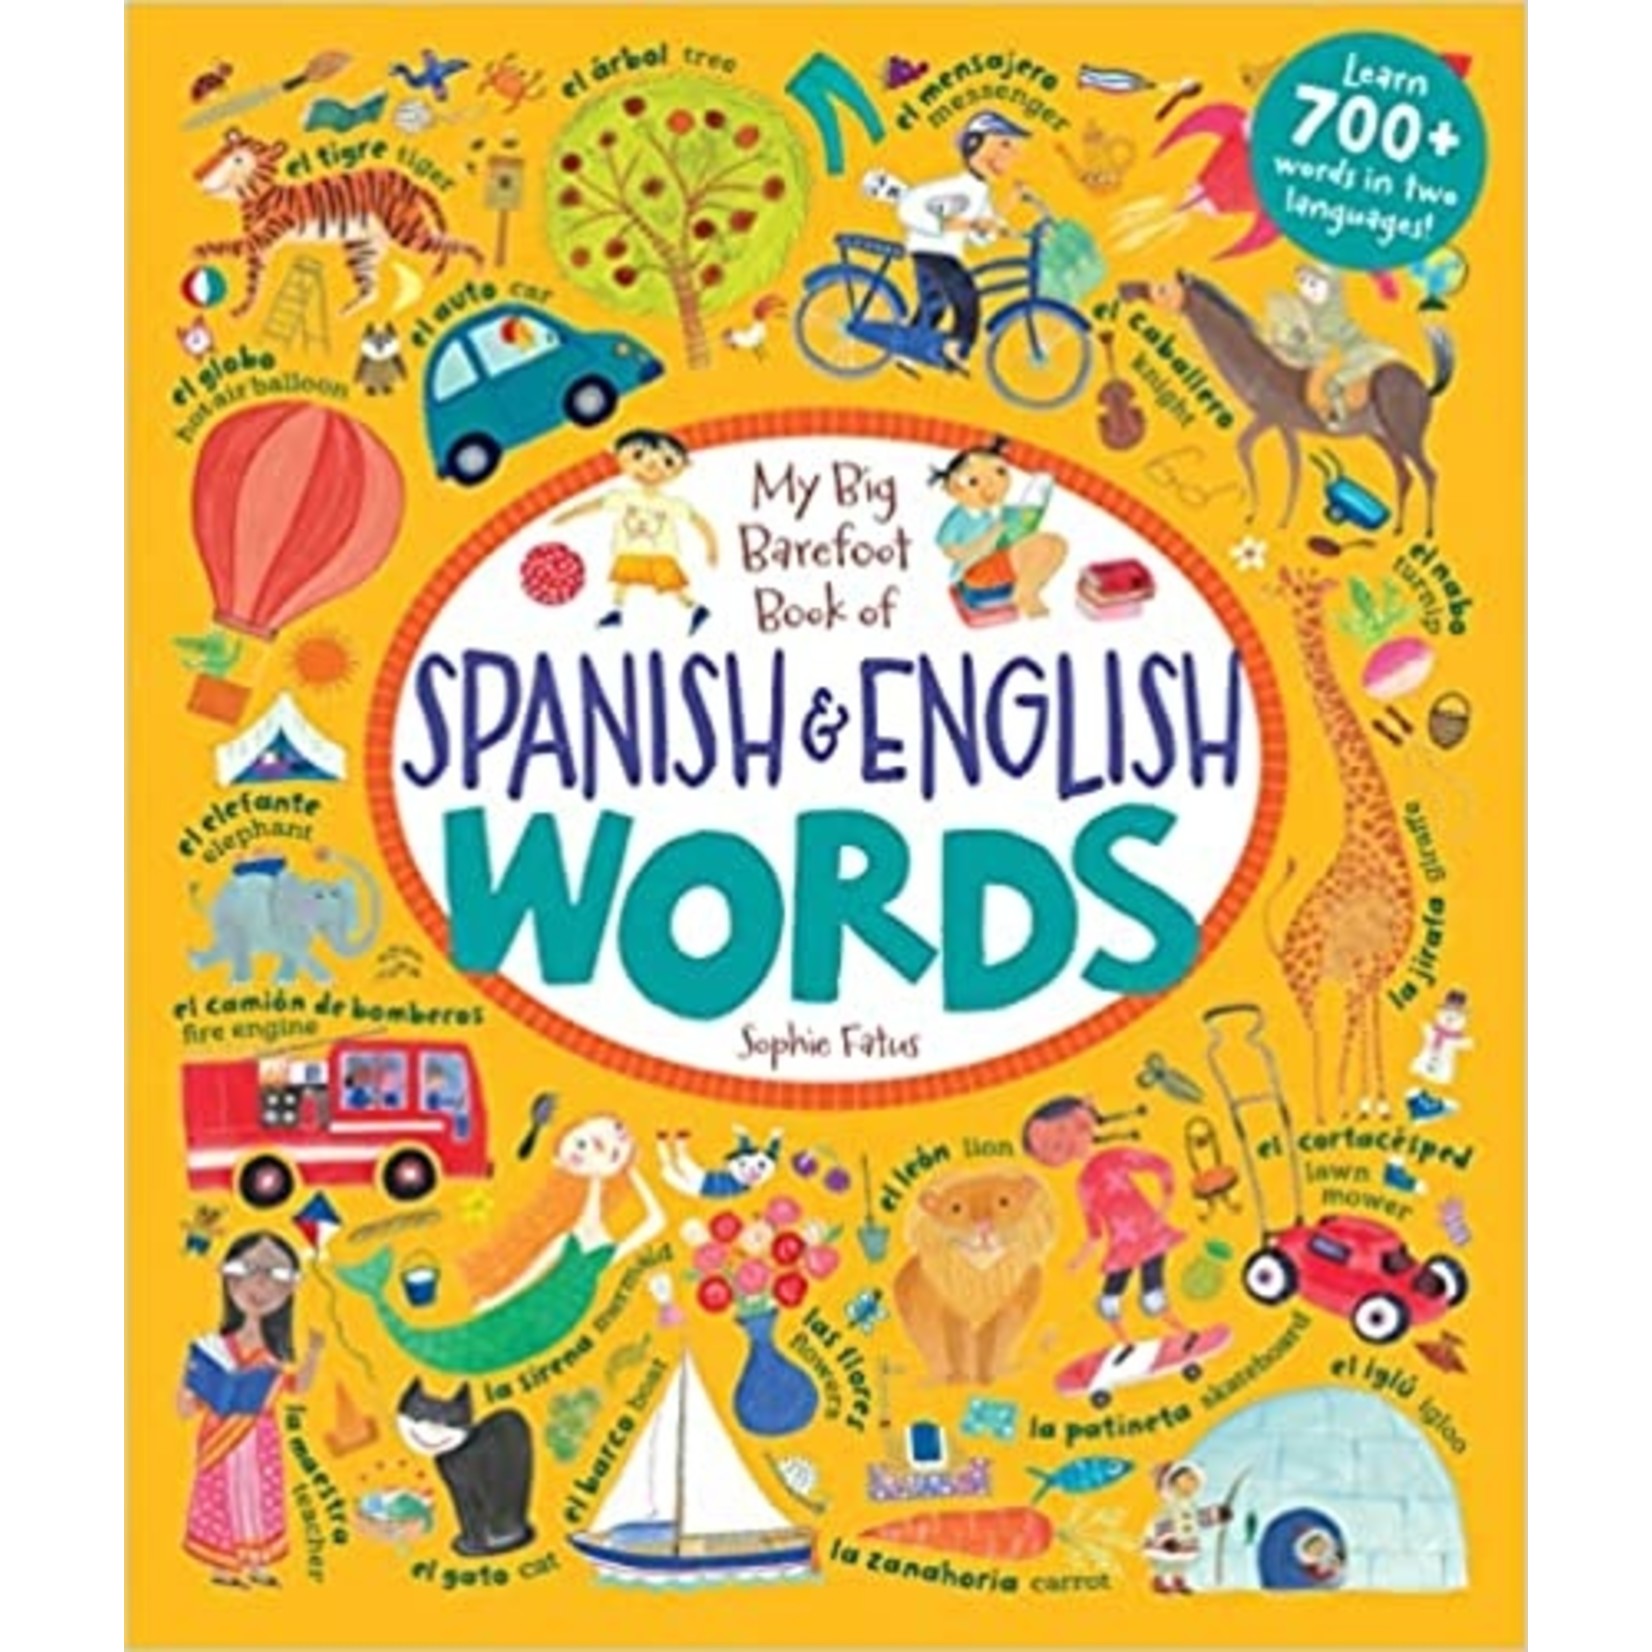 My Big Barefoot Book of Spanish and English Words - The Blue House